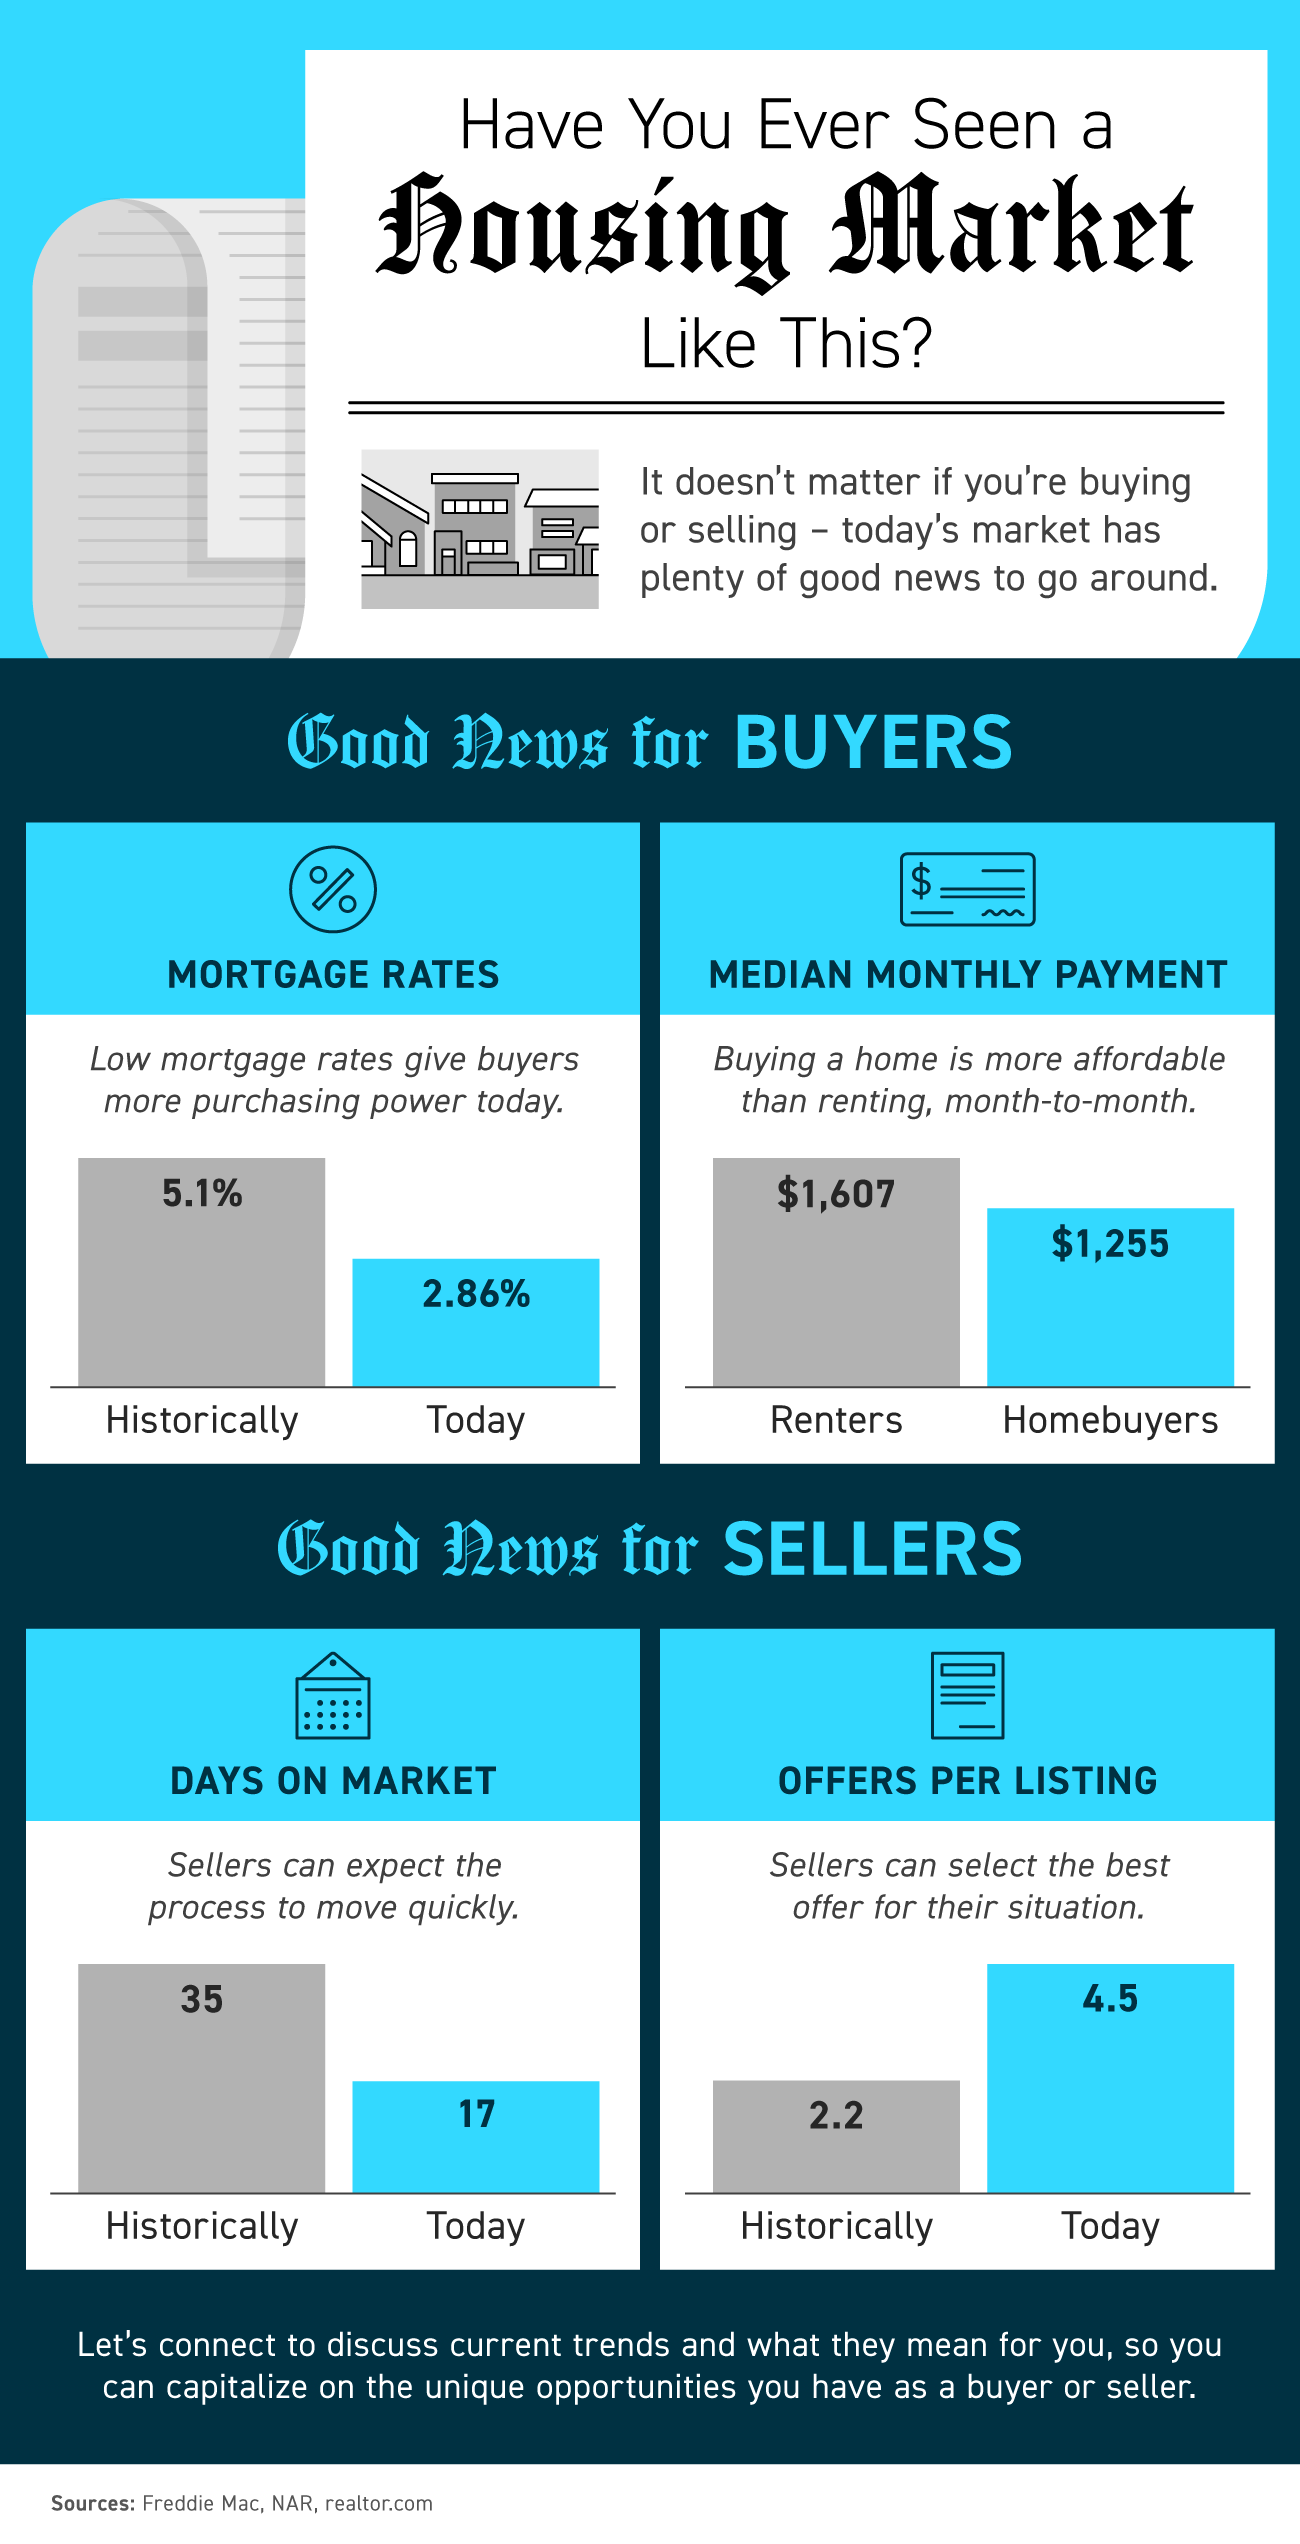 Have You Ever Seen a Housing Market Like This? [INFOGRAPHIC] | Simplifying The Market